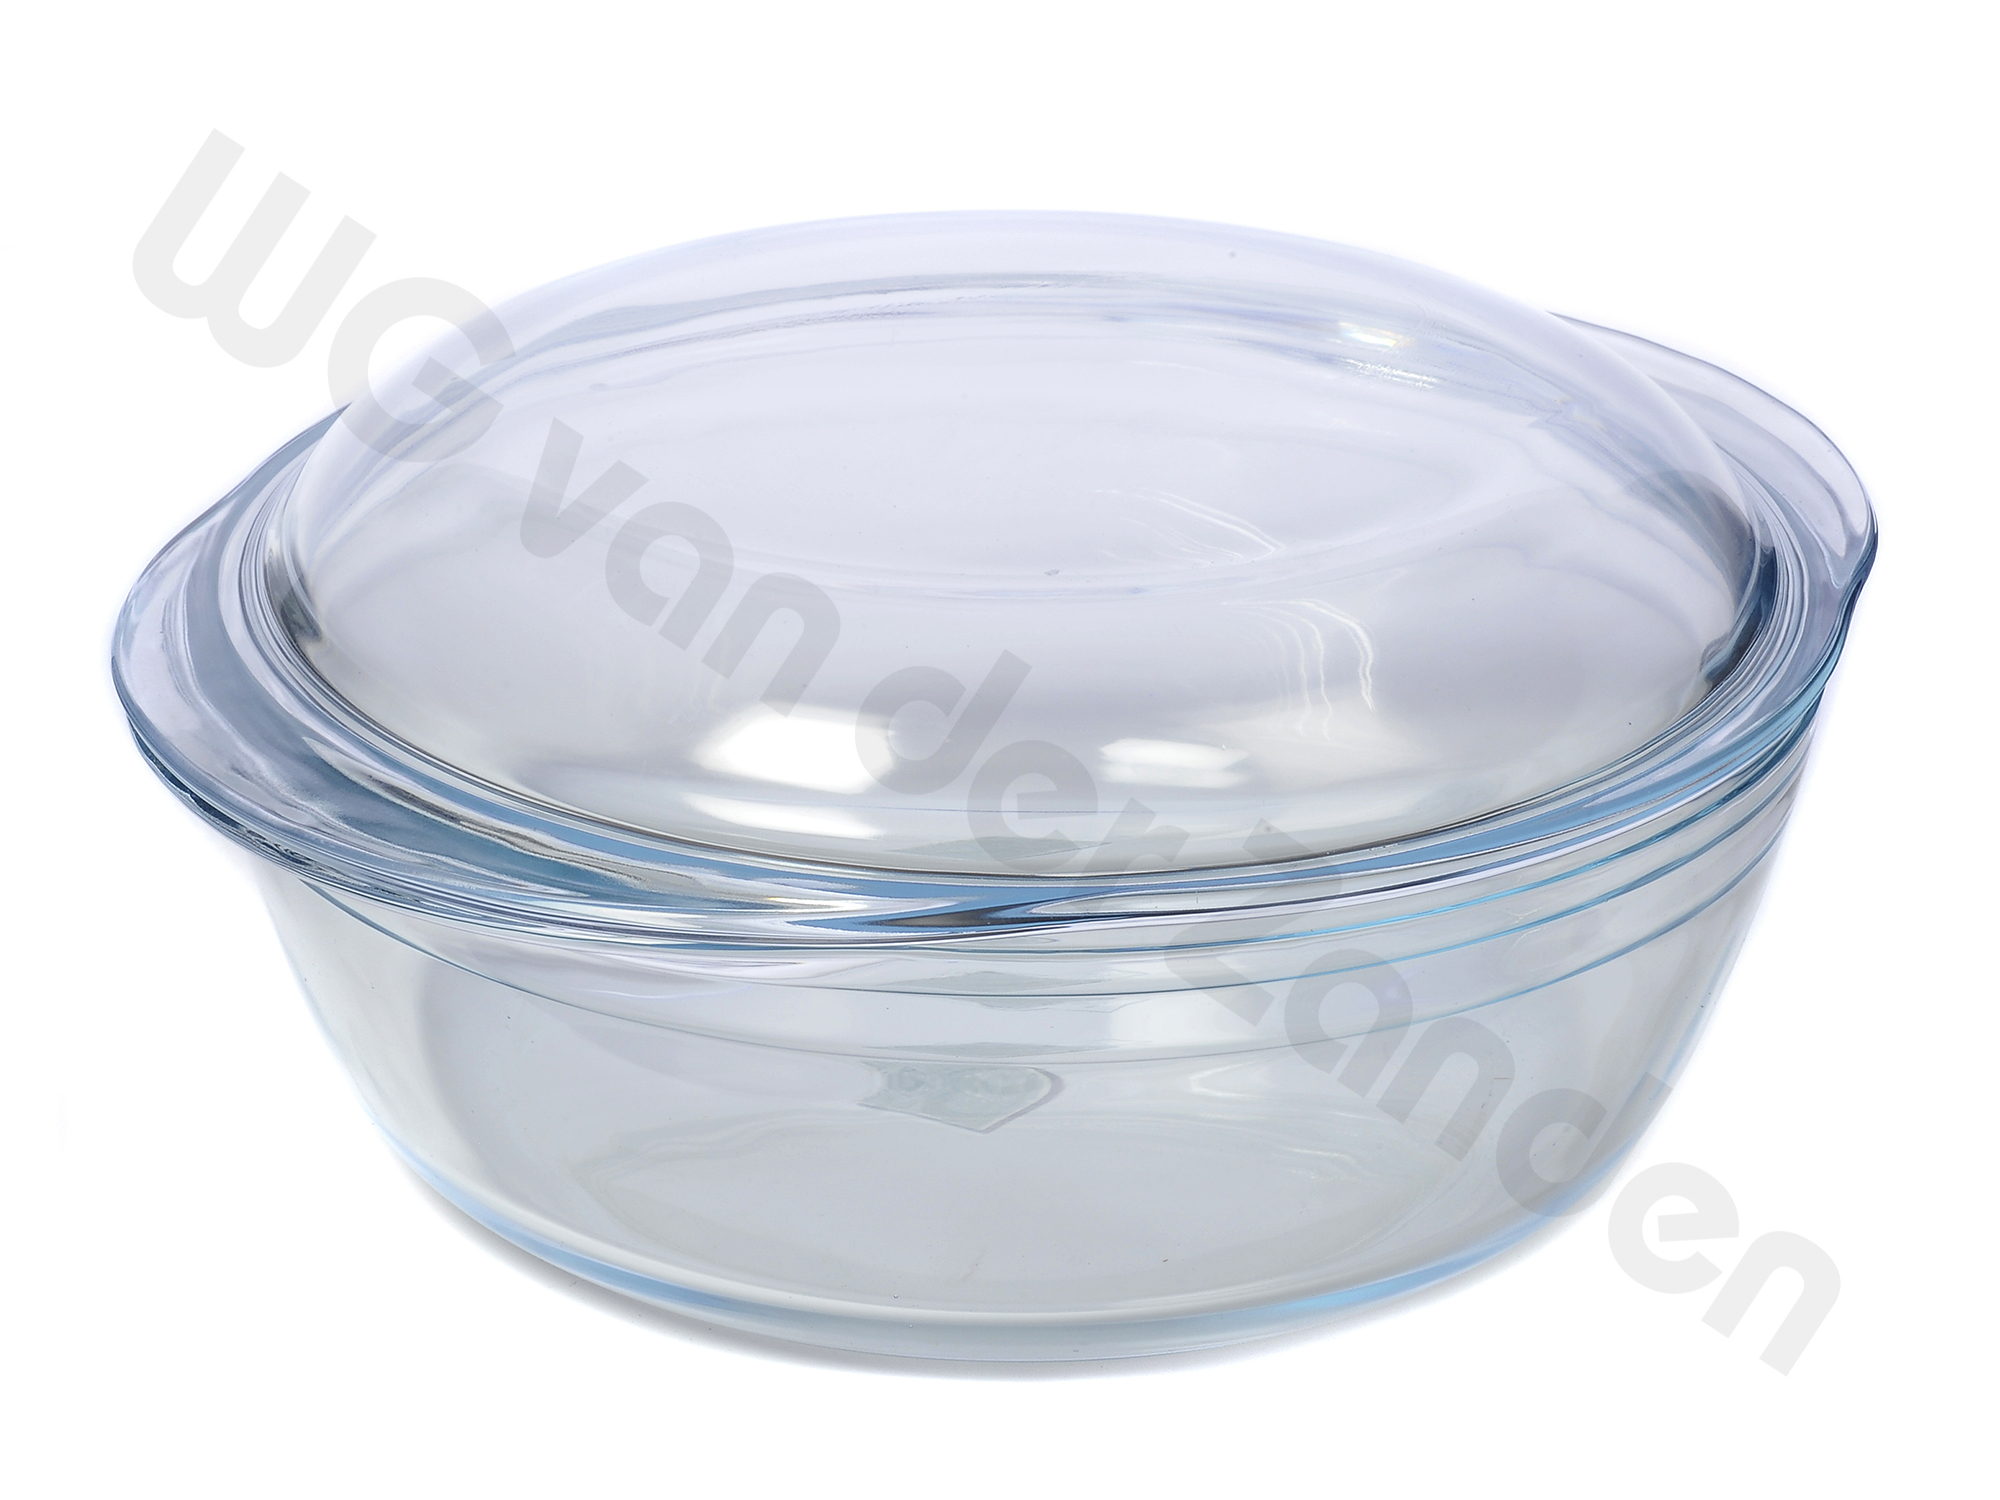 220526 DISH GLASS OVEN ROUND WITH COVER 20Ø X 10CM 1.6 LTR